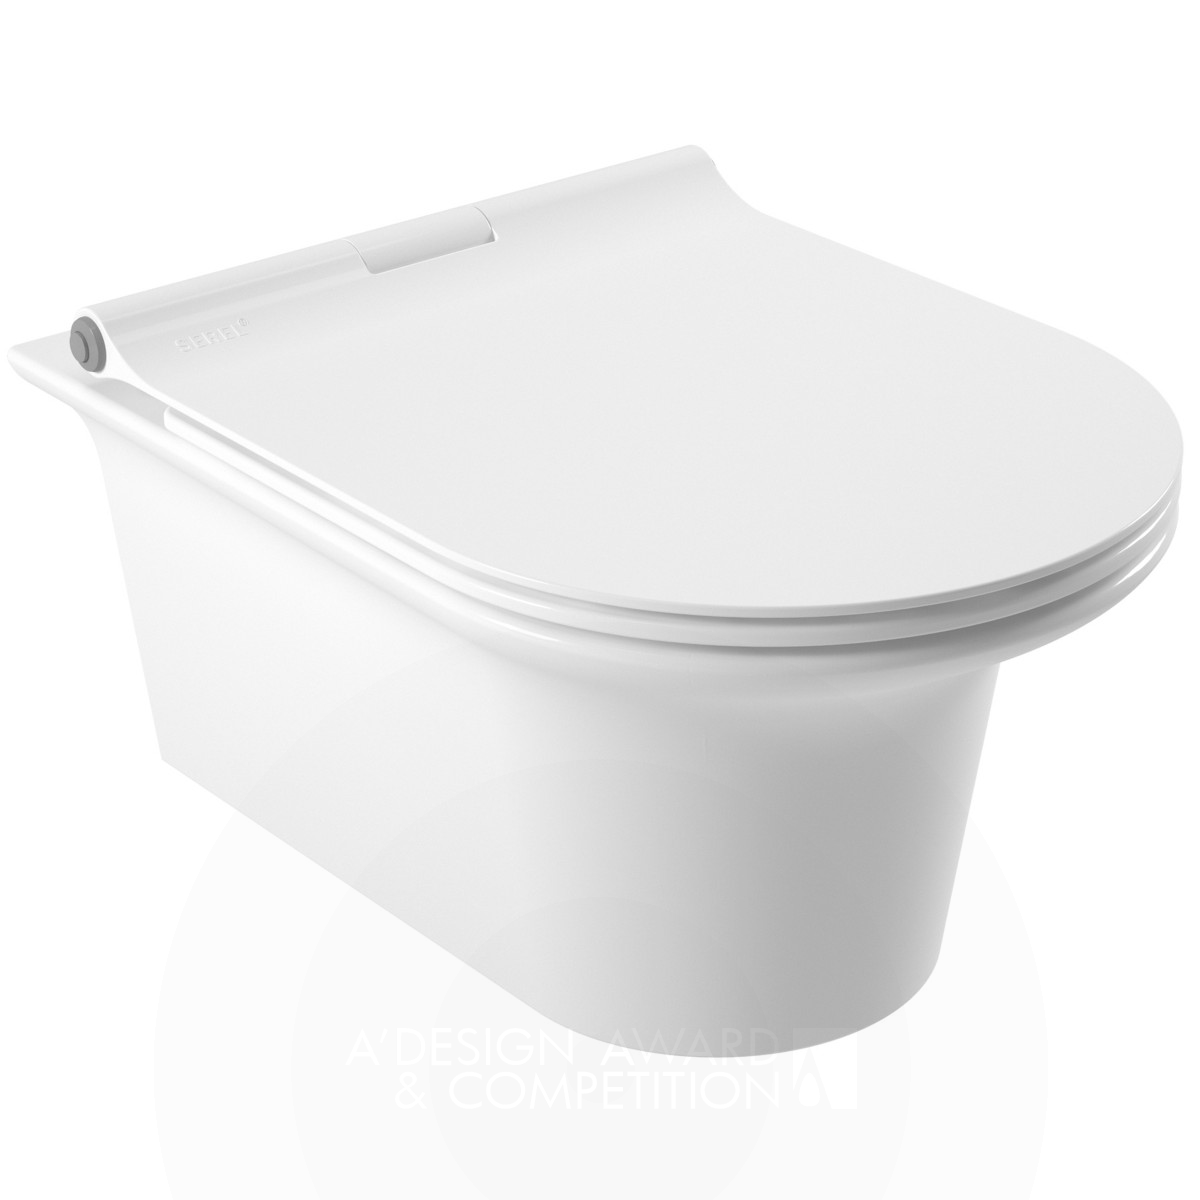 SEREL Purity Wall hung WC Pan by SEREL Ceramic Factory